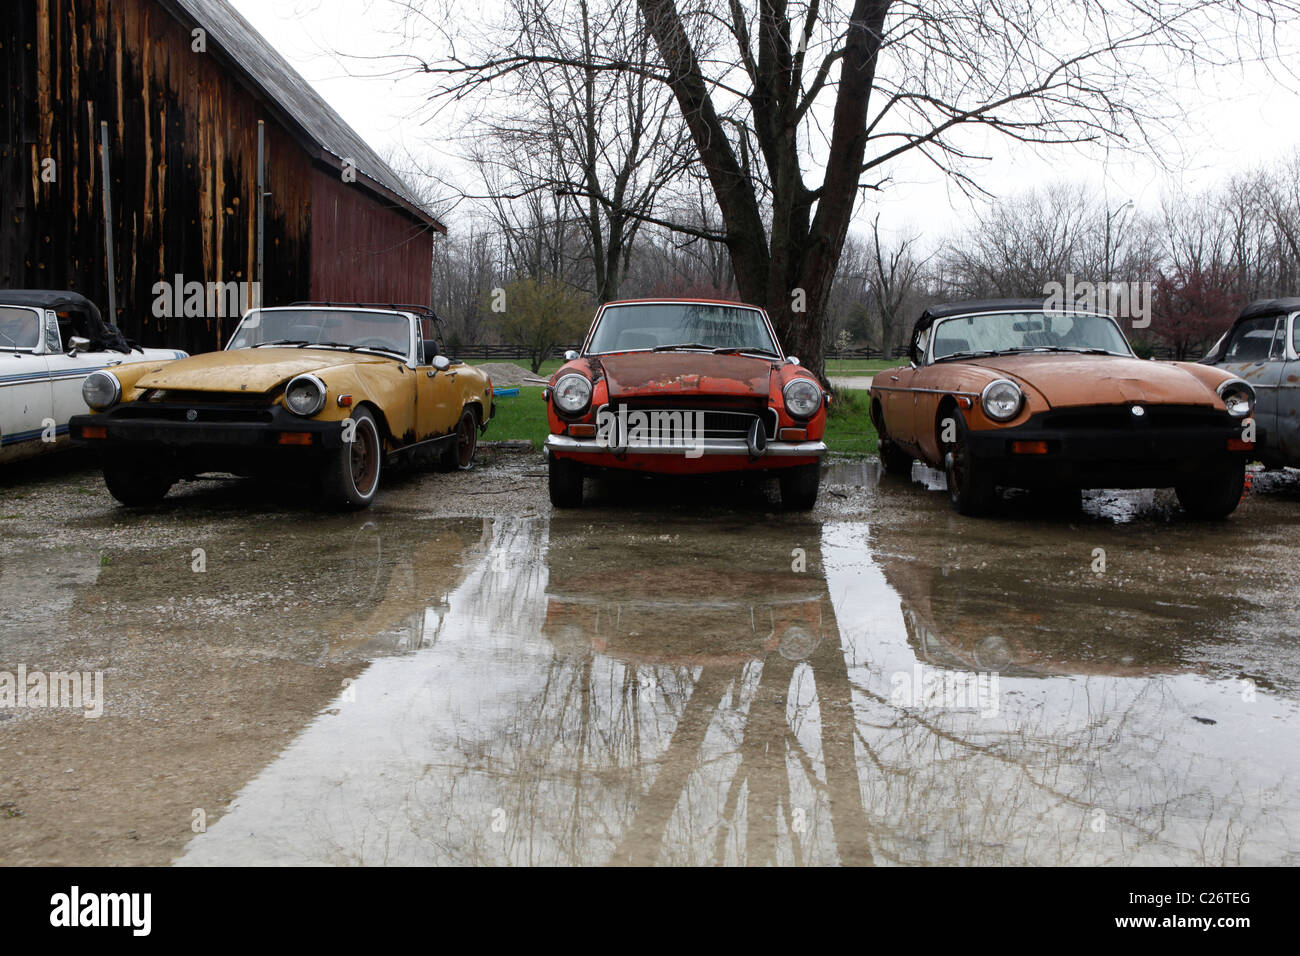 MG British Sportscar sits before auction sale next to a barn in rural Indiana. sports car Stock Photo